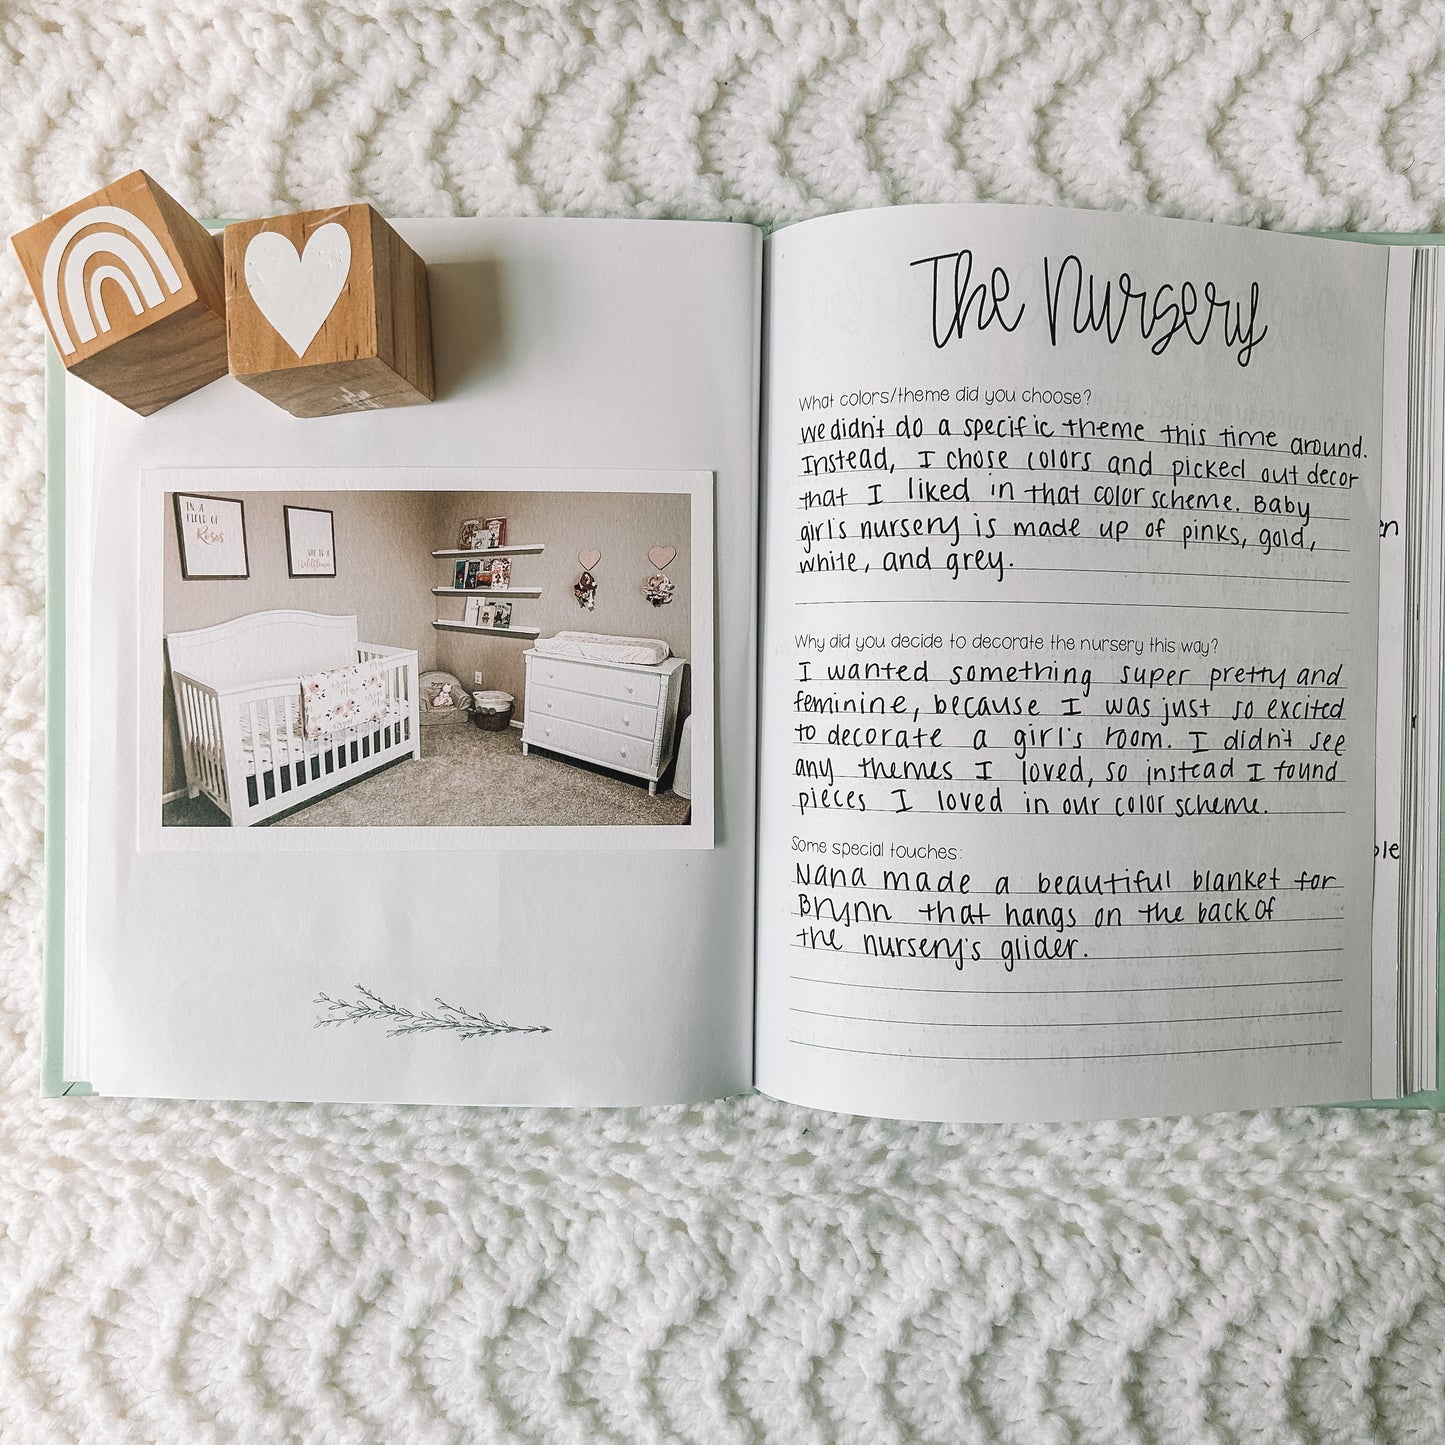 Two page spread features a photo of a nursery on the left page and a page titled The Nursery with three prompts on the right page.